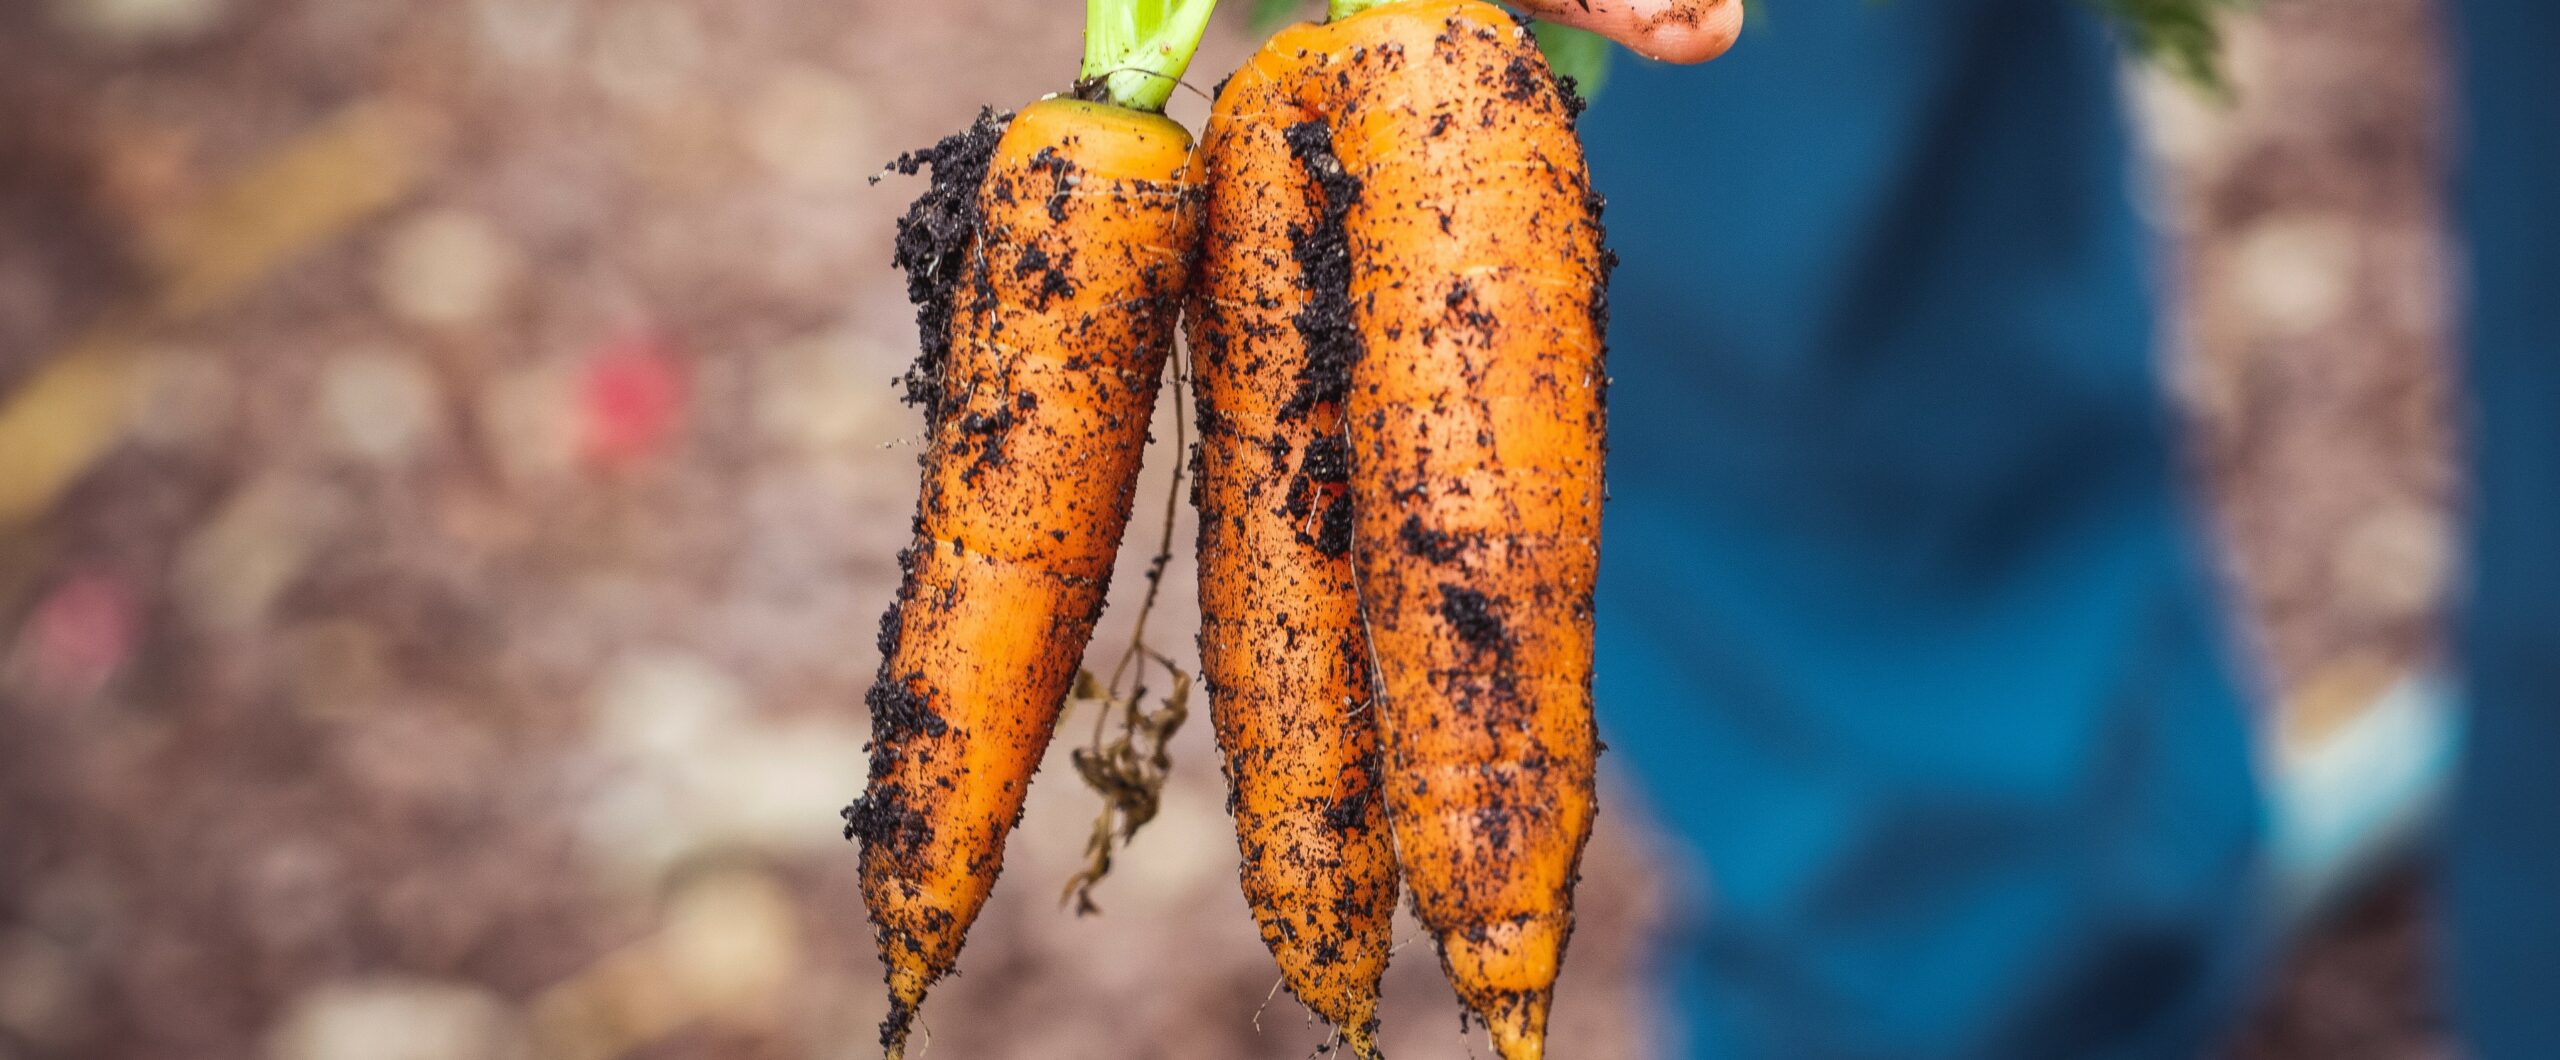 Carrots_small_size